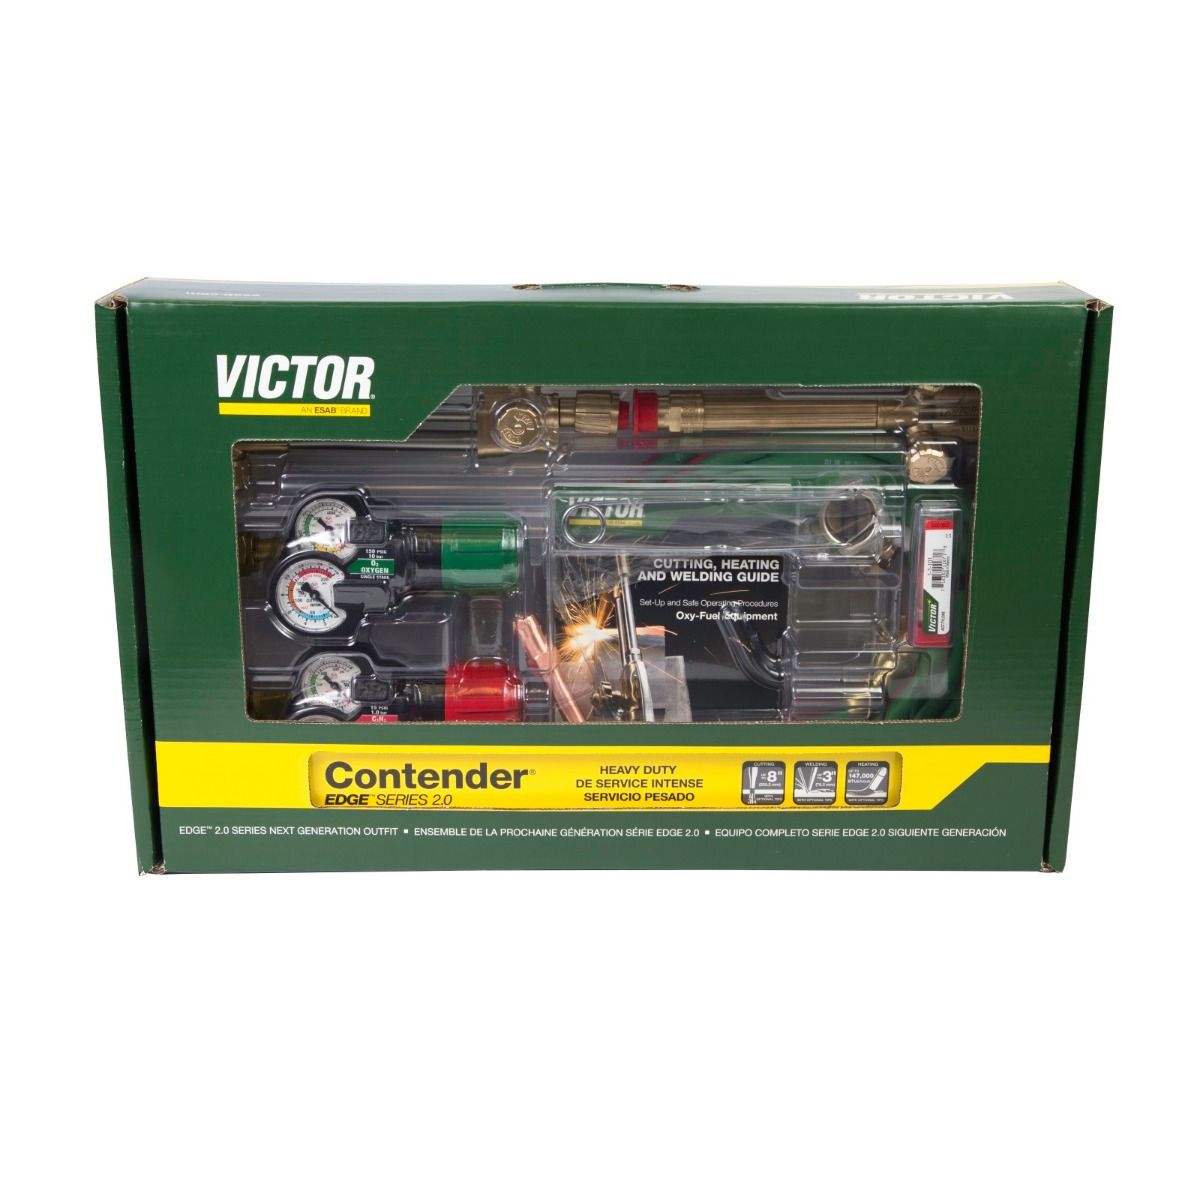 Victor Contender 540/510 Edge 2.0 Heavy Duty Outfit (Acetylene) - 0384-2130